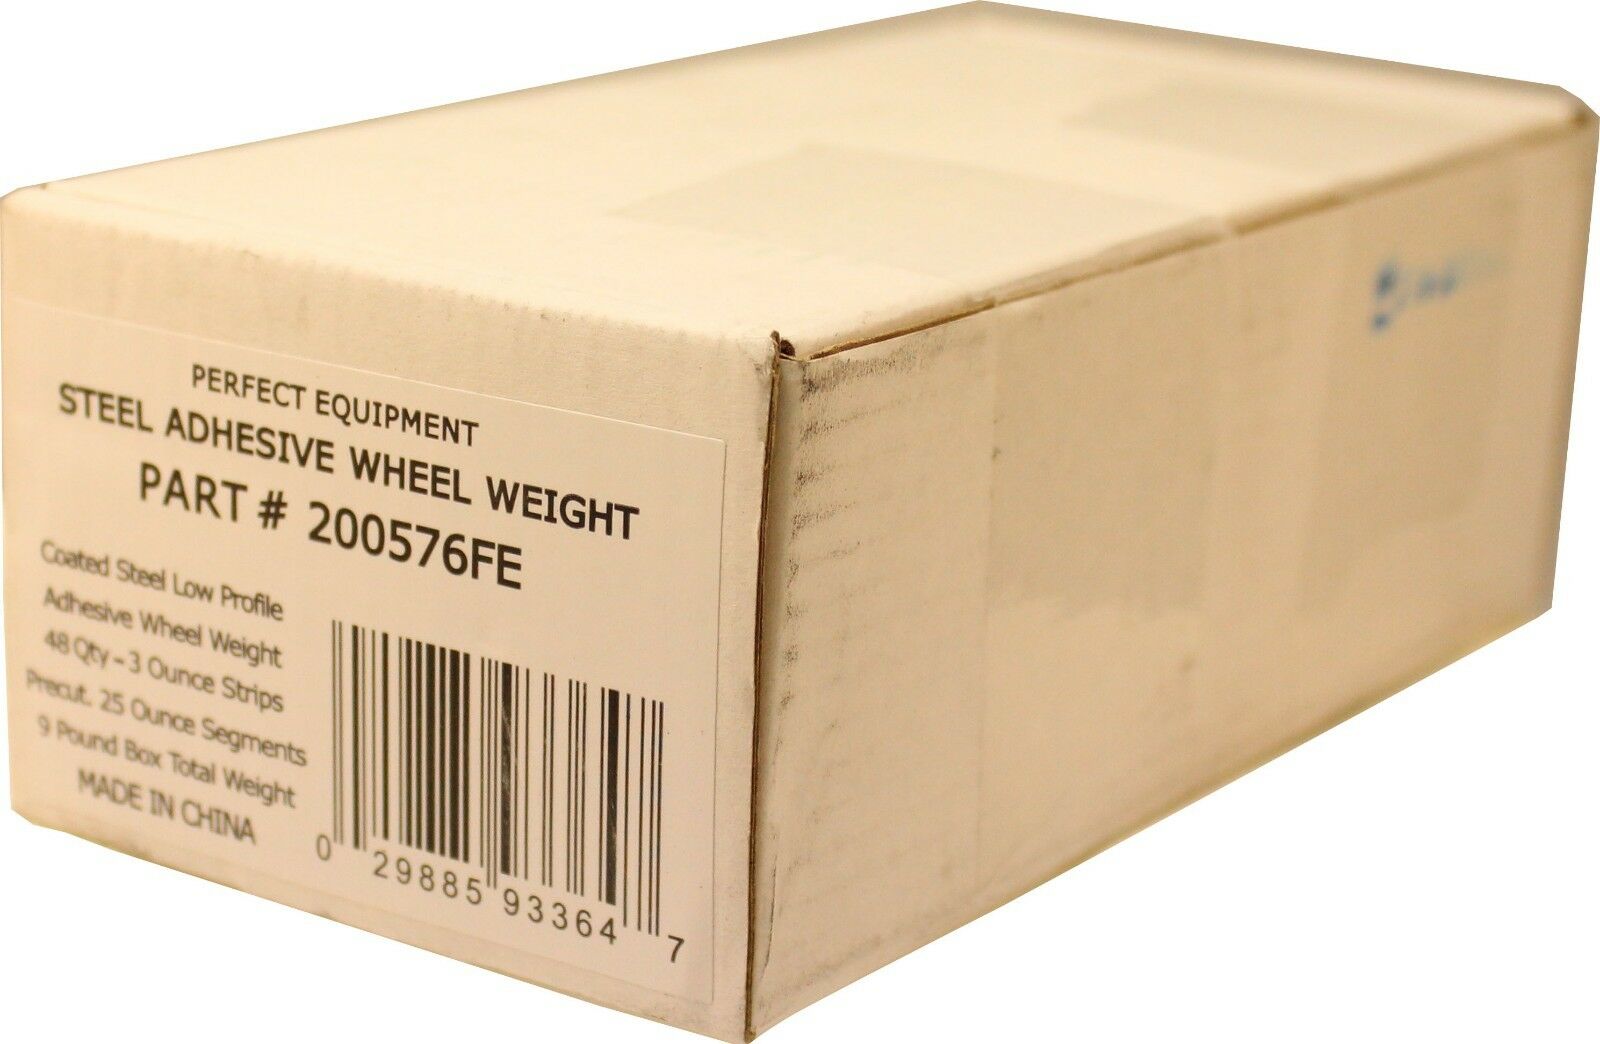 Perfect Equipment 200576FE Steel Tape Wheel Weight 0.25oz 3/4" - 576 Pieces